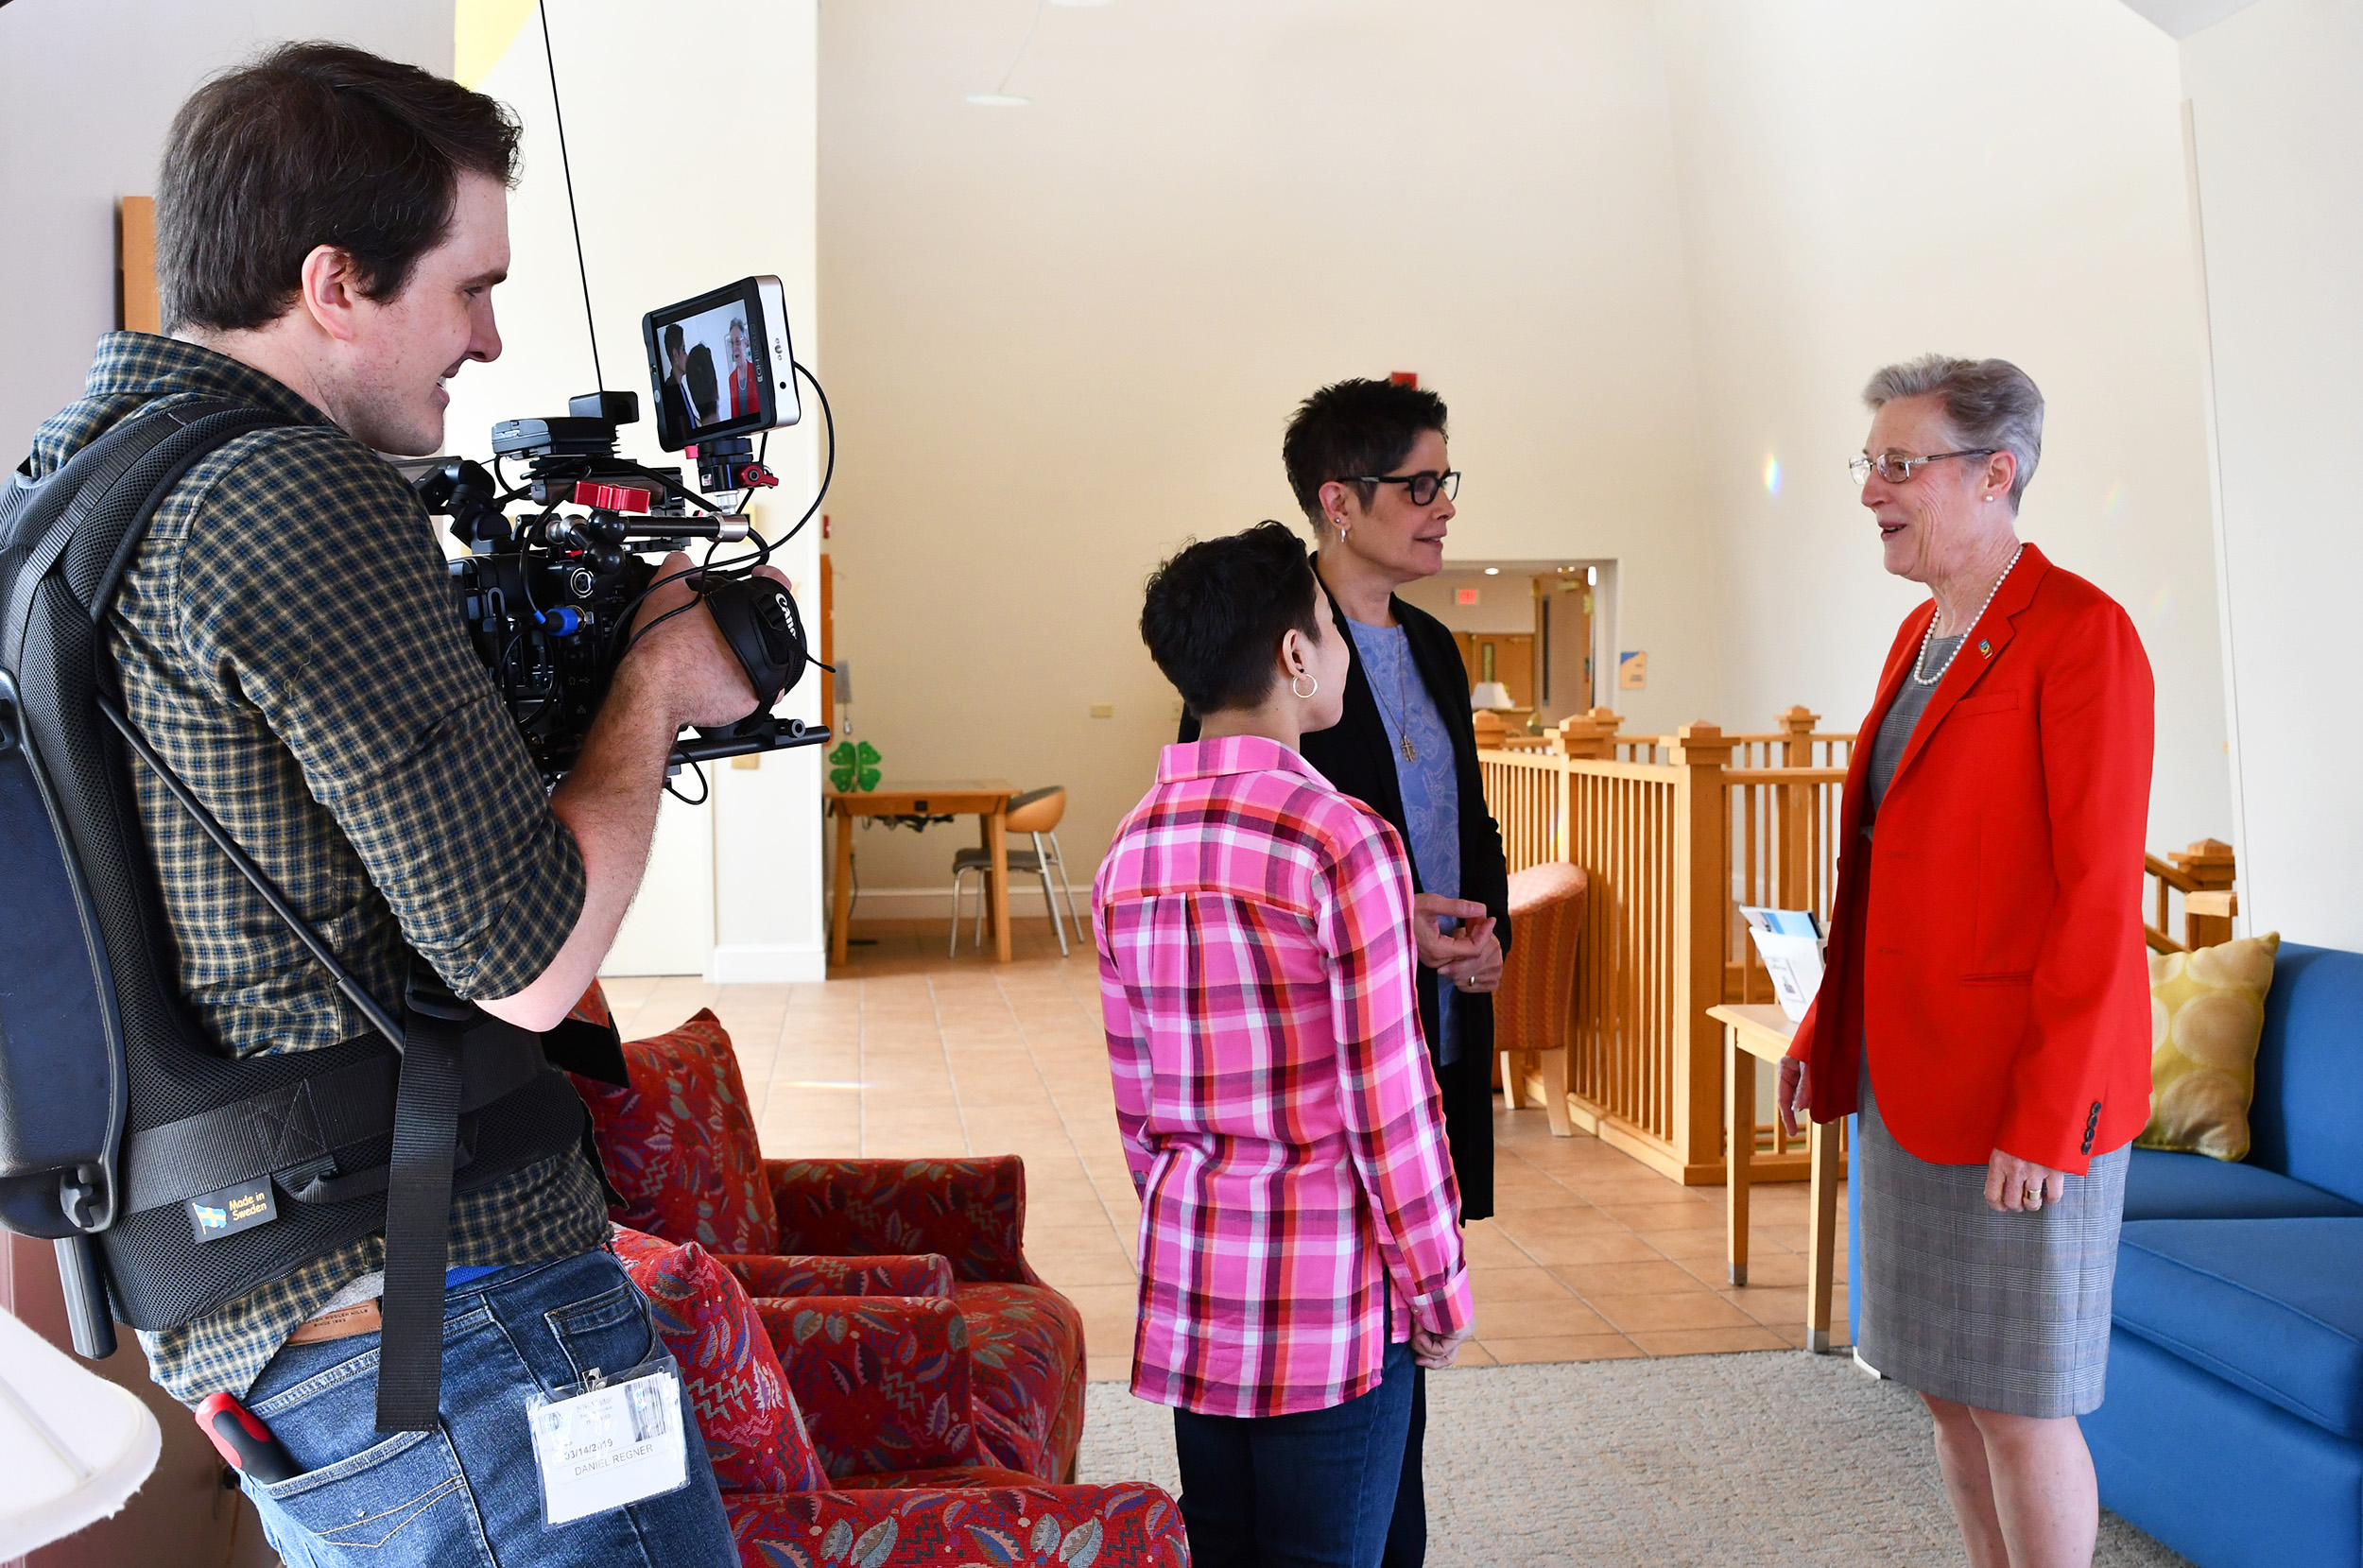 Behind the scenes: Noah, Gisela, and Dr. Tifft are filmed by our crew